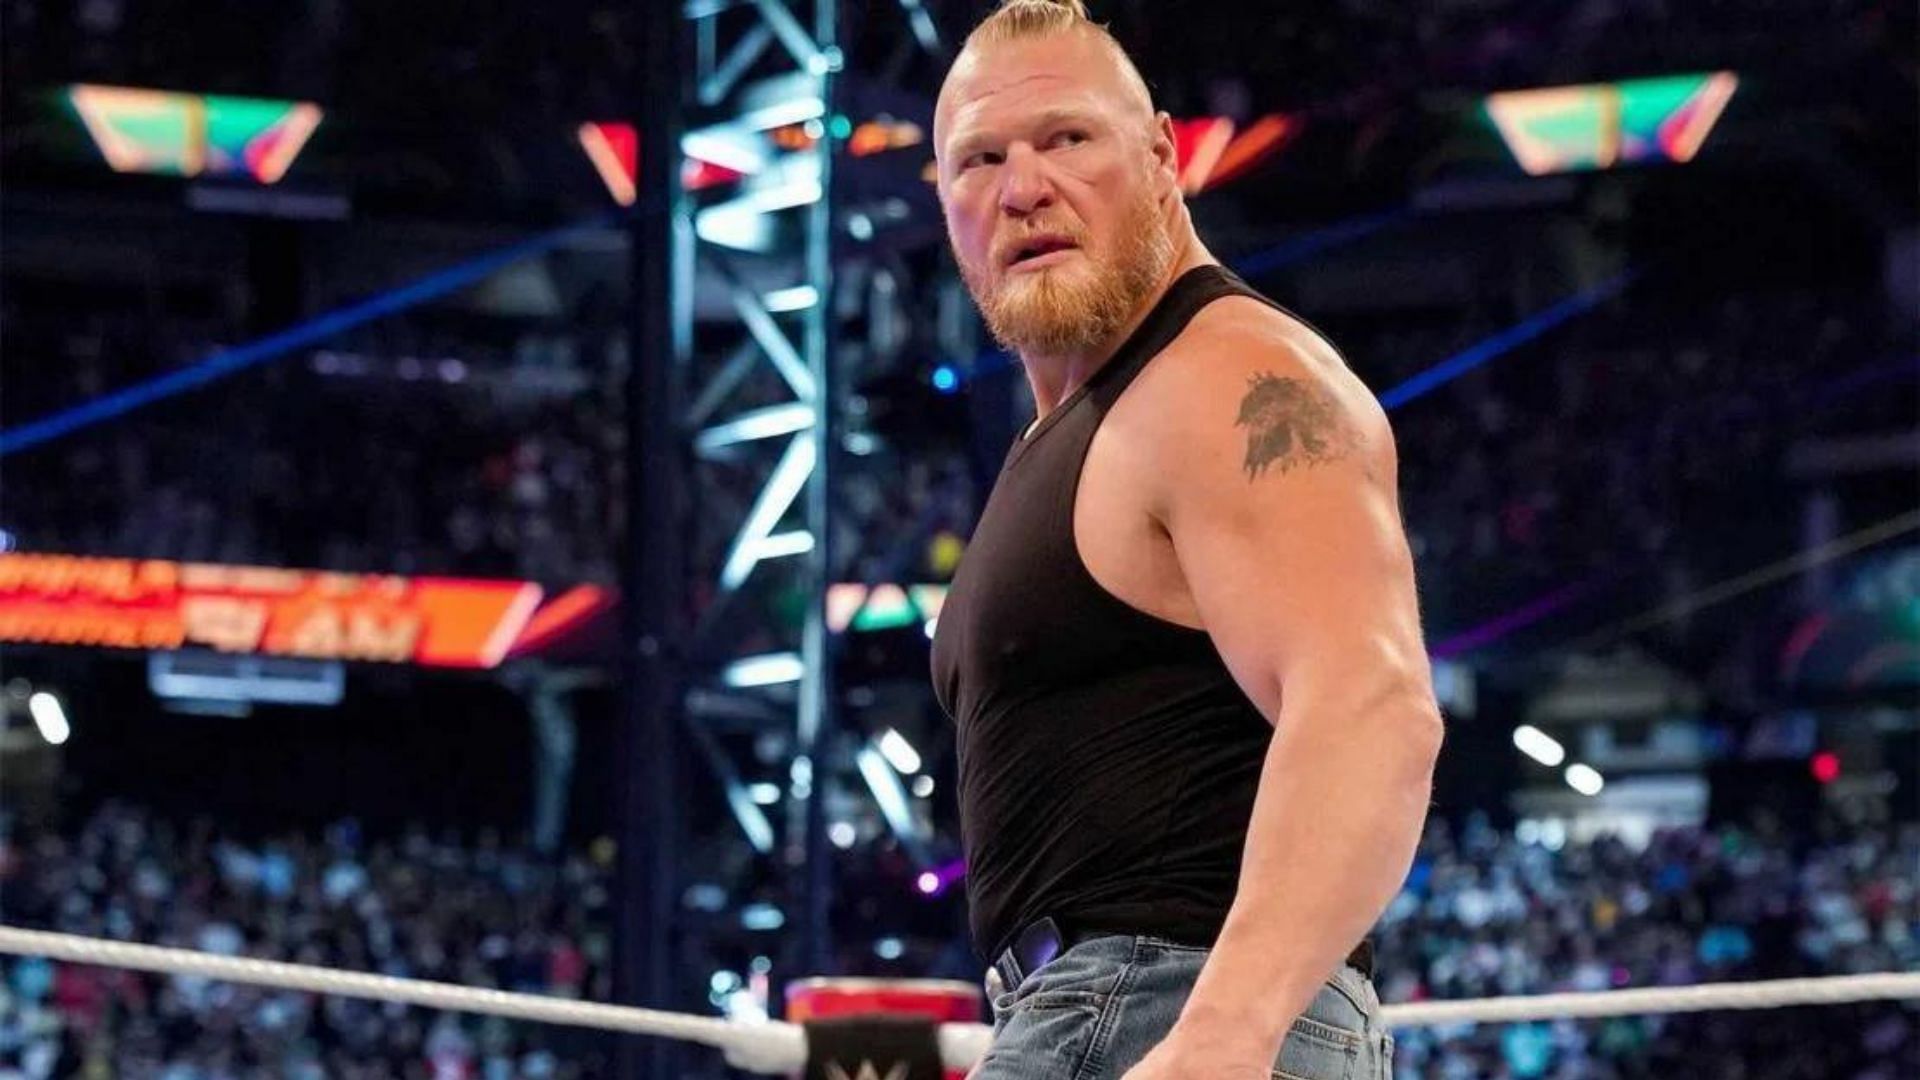 Brock Lesnar shared the ring with numerous WWE stars throughout the years